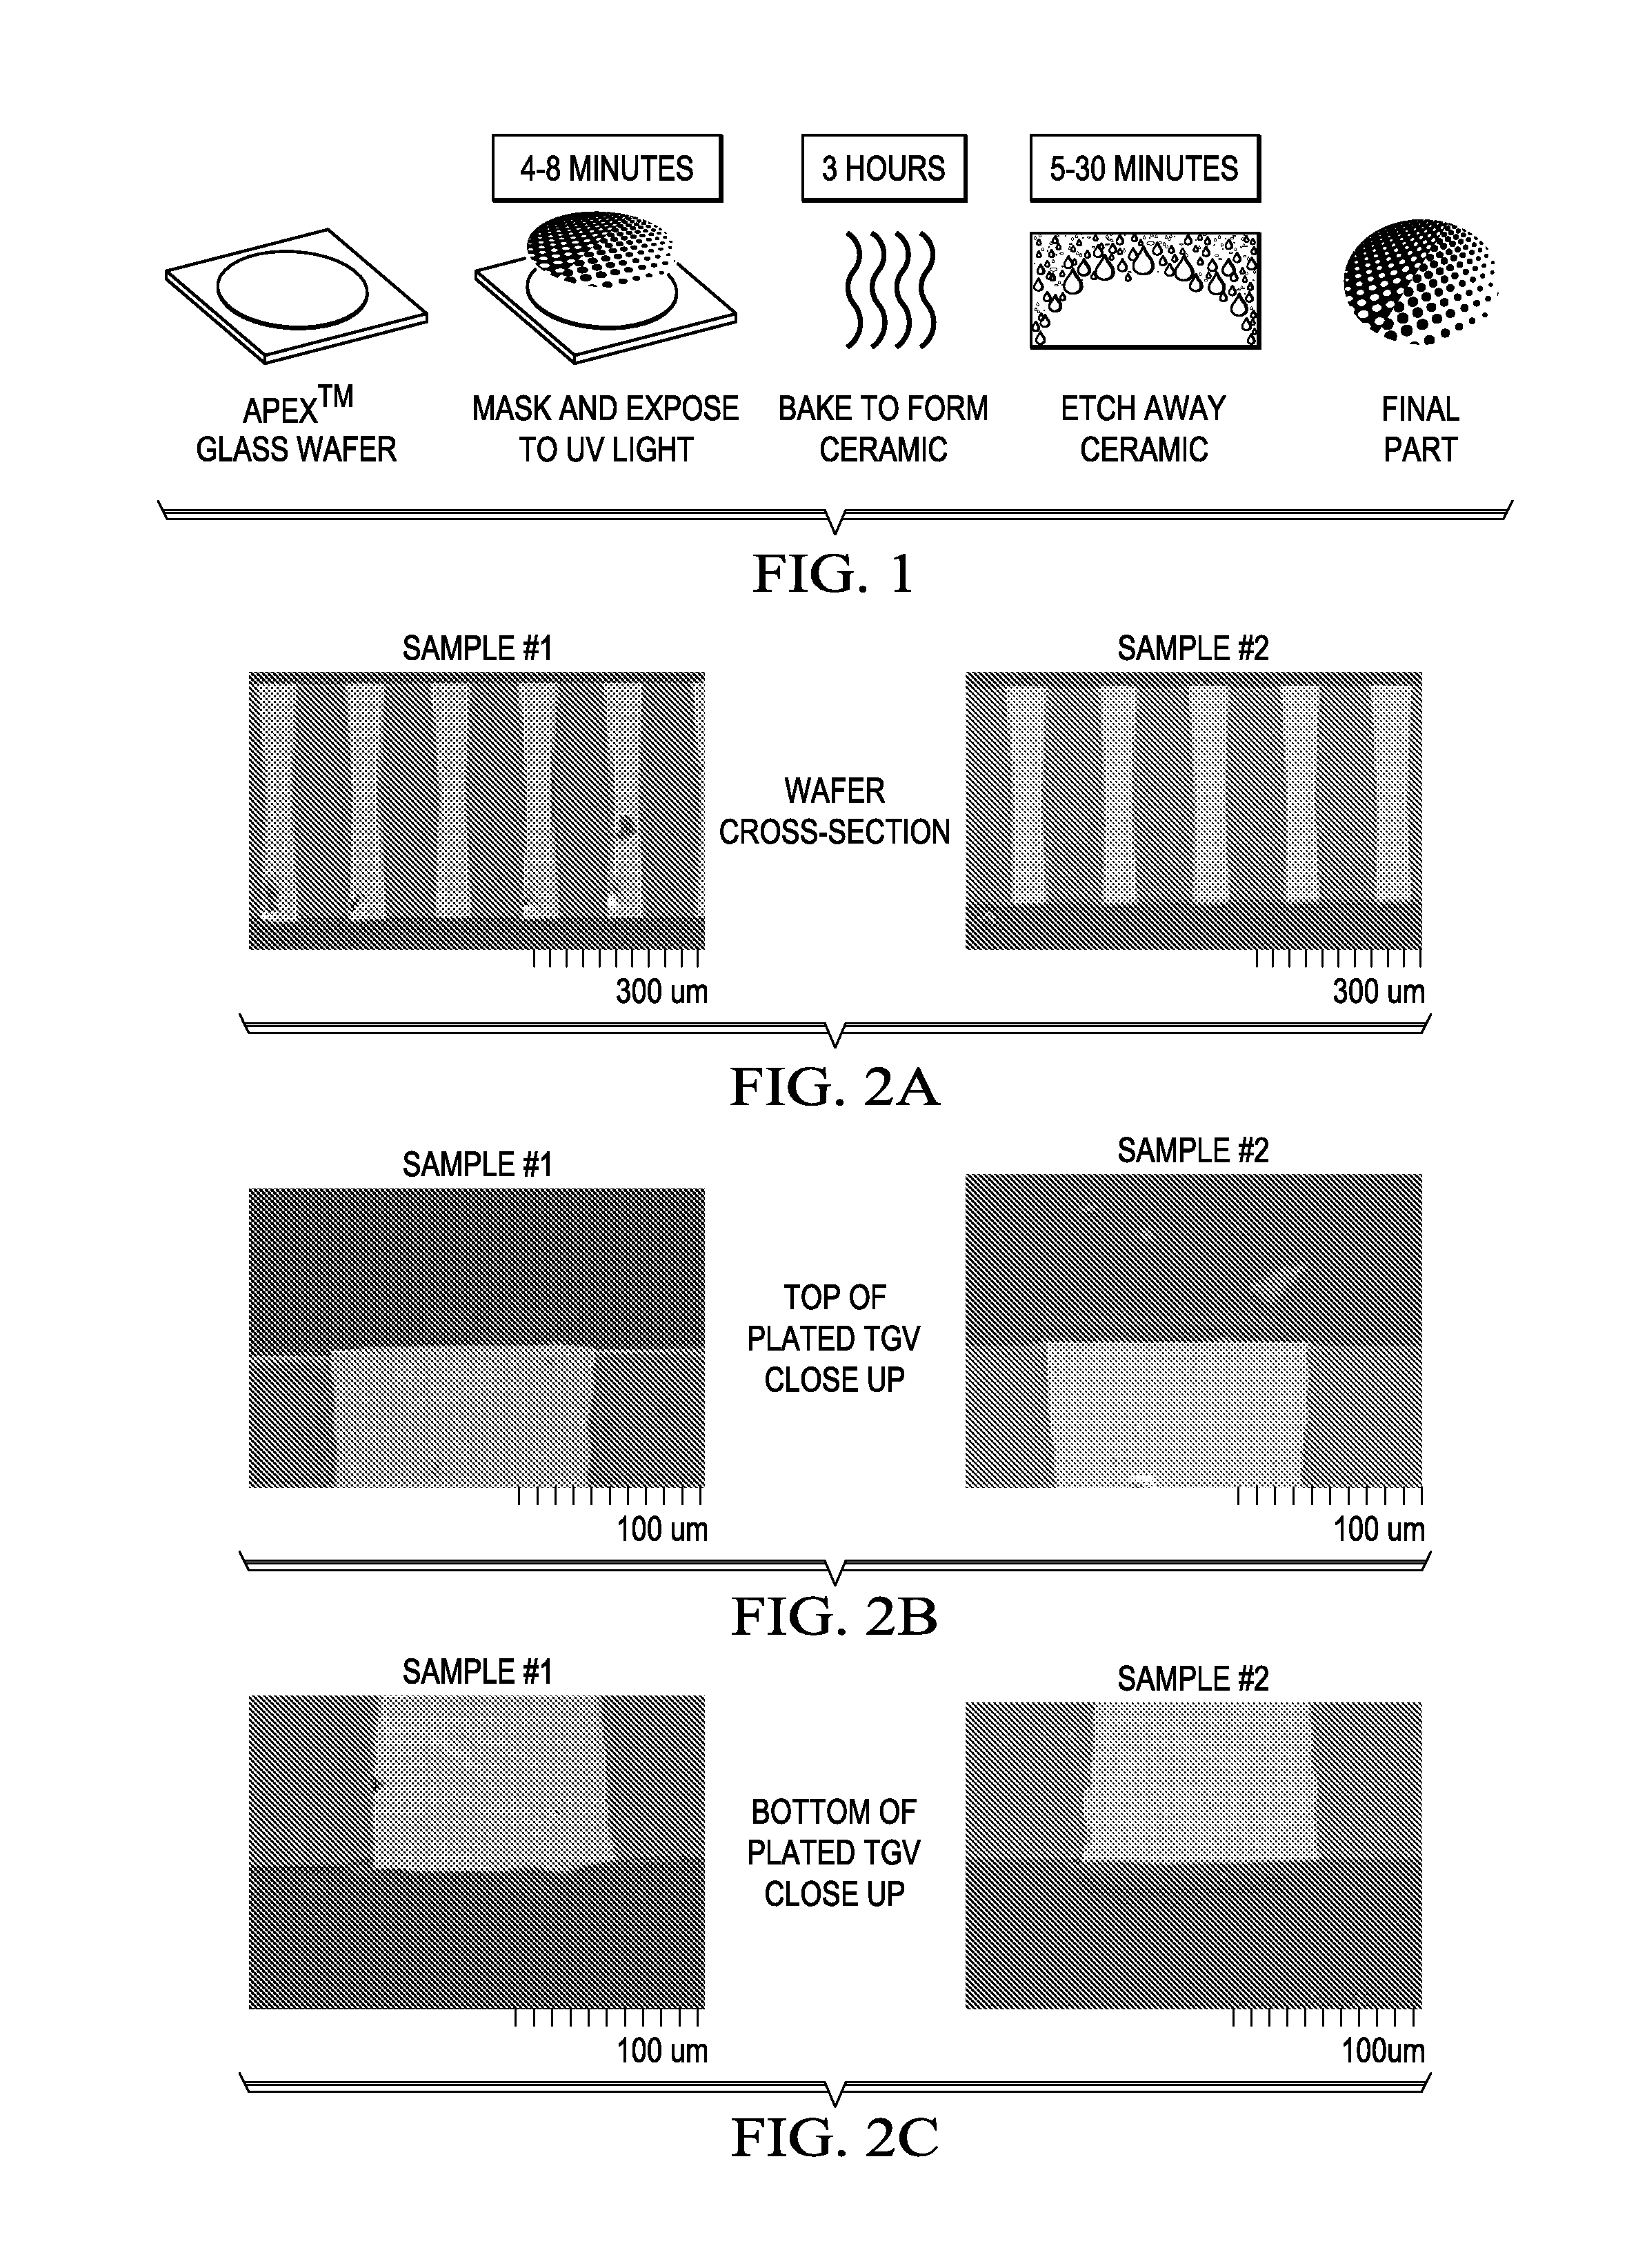 Methods of fabricating photoactive substrates suitable for electromagnetic transmission and filtering applications